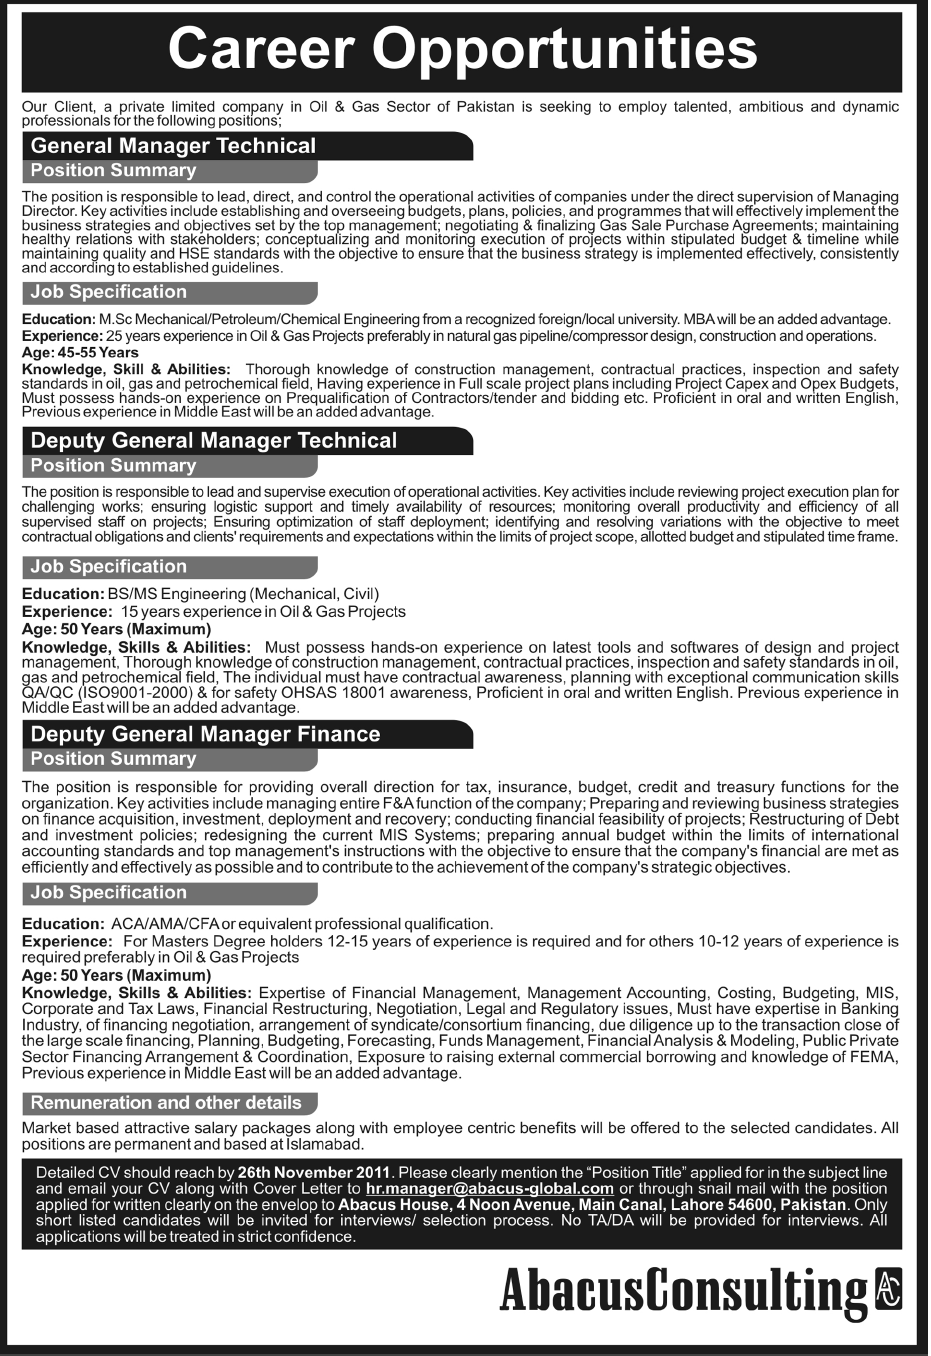 Oil and Gas Sector Jobs Opportunity